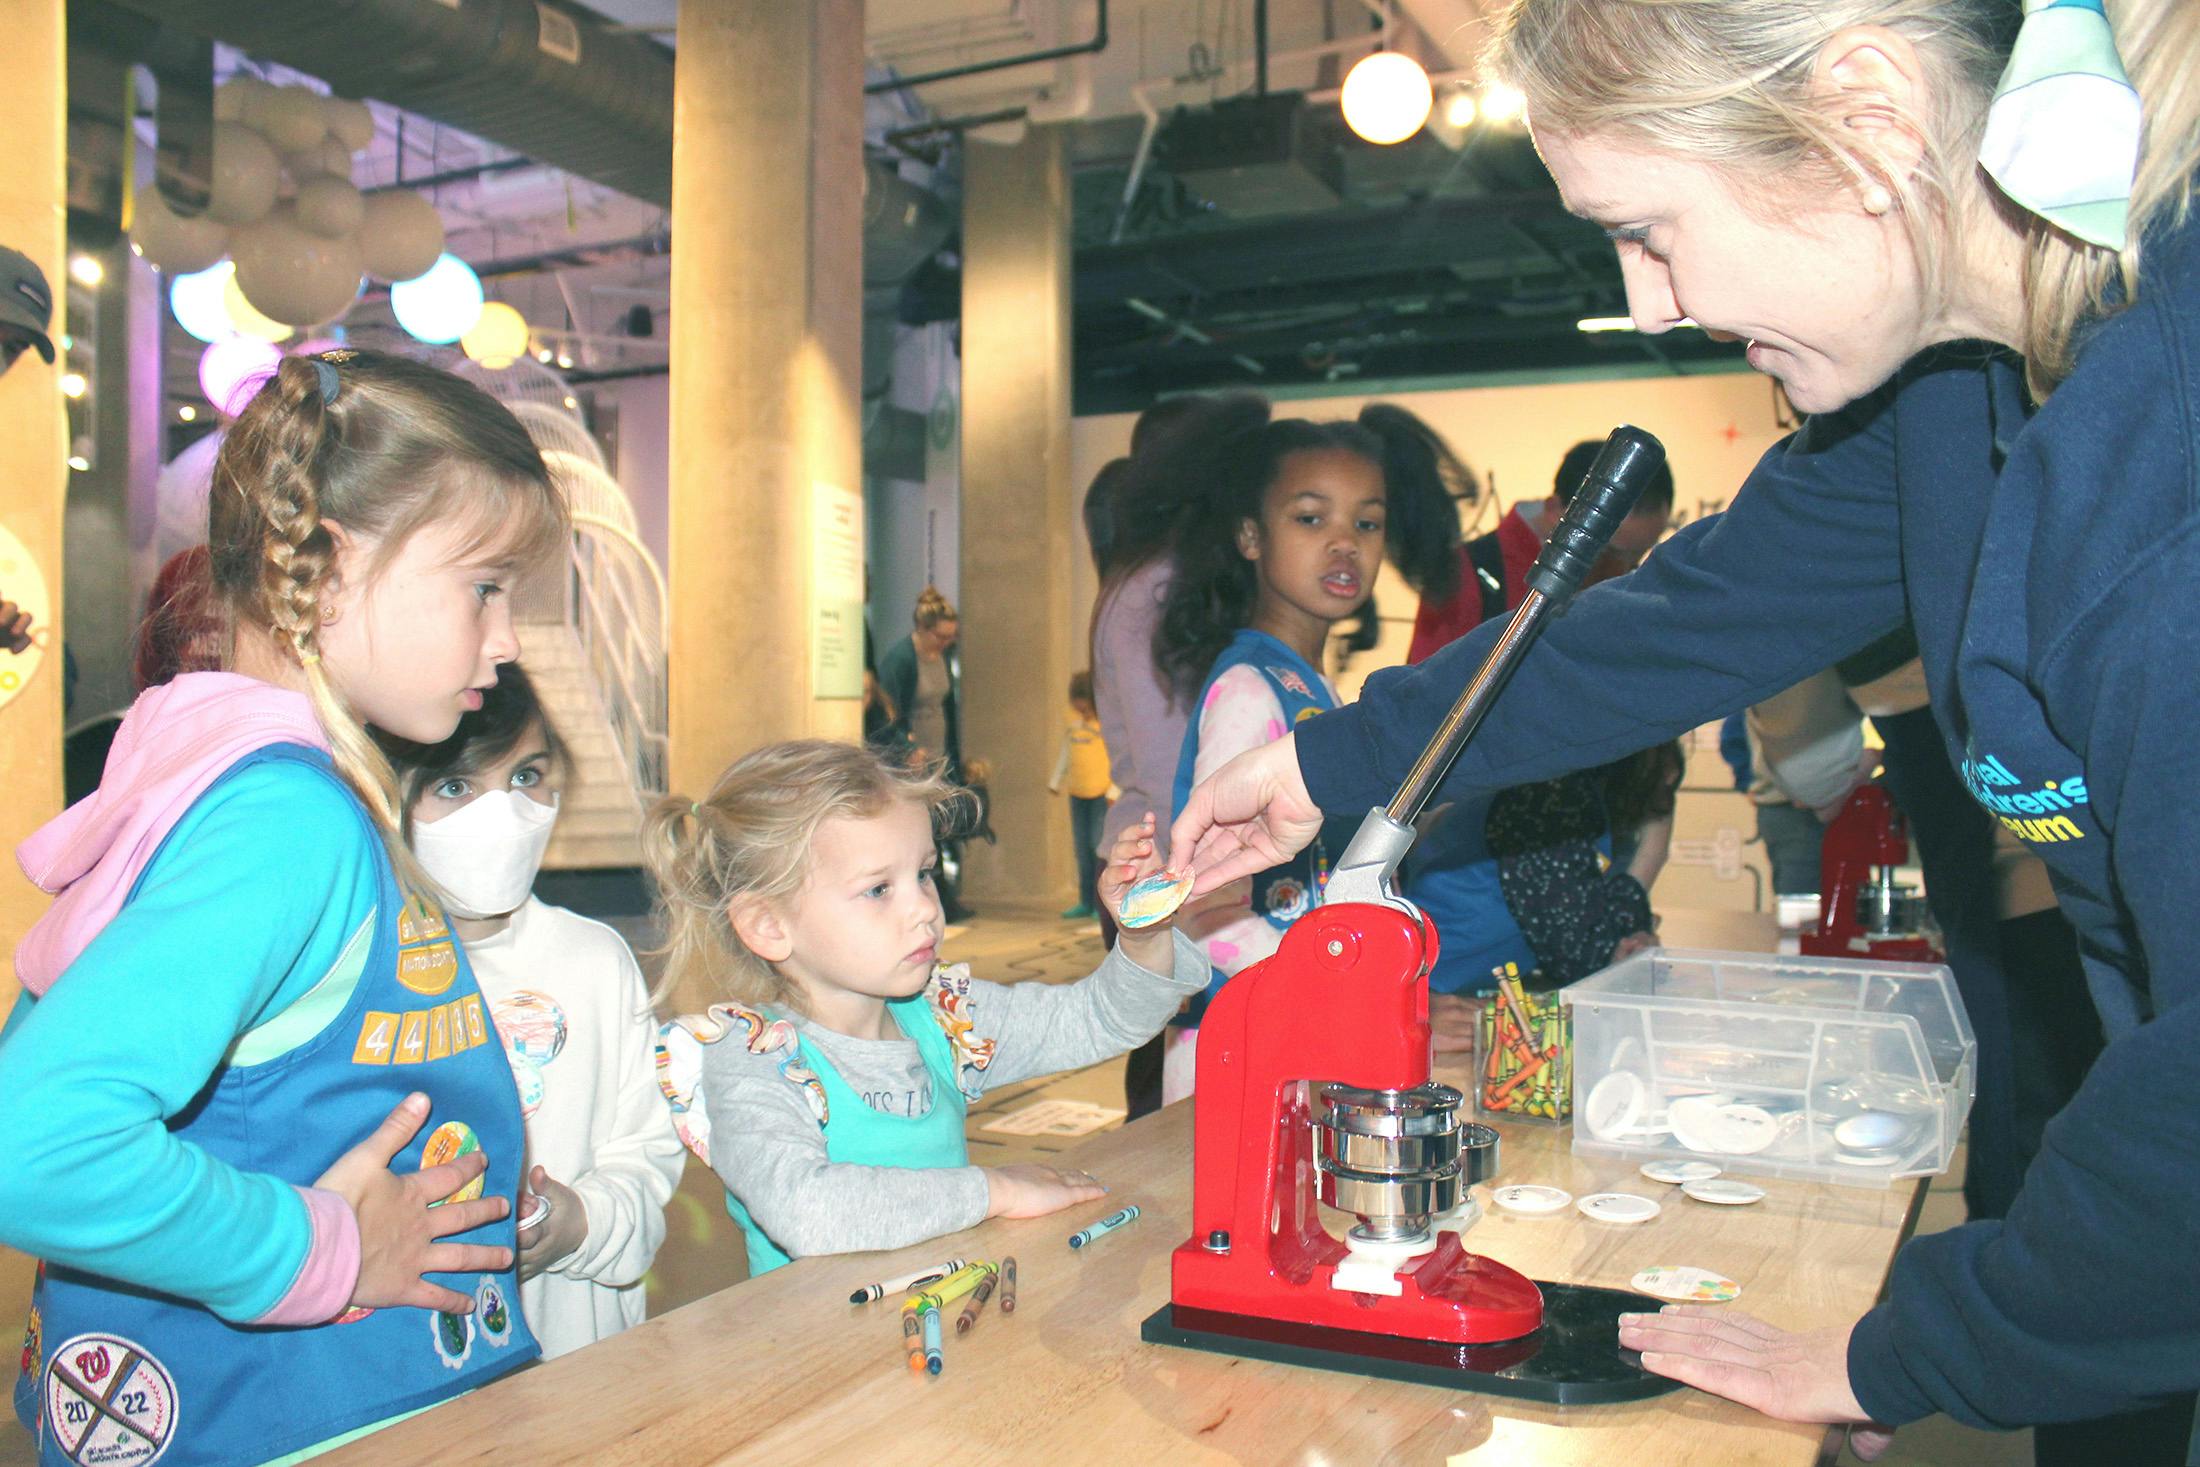 Girl scouts participating in Girl Scout Day programming at National Children's Museum